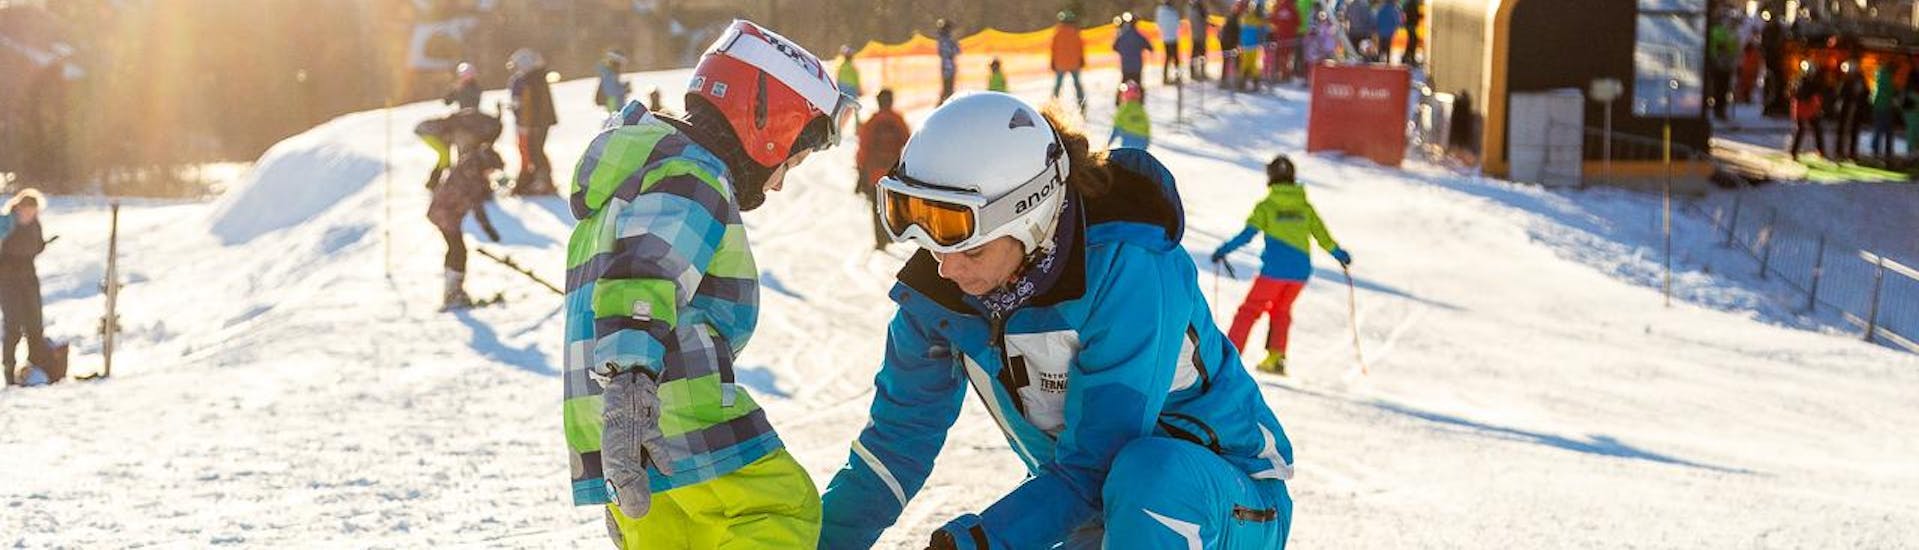 Under the supervision of an experienced ski instructor from the ski school Ternavski Snow Academy Tatranska Lomnica, a small child is getting ready for his first steps during the course Ski Instructor Private for Kids (from 4 years).